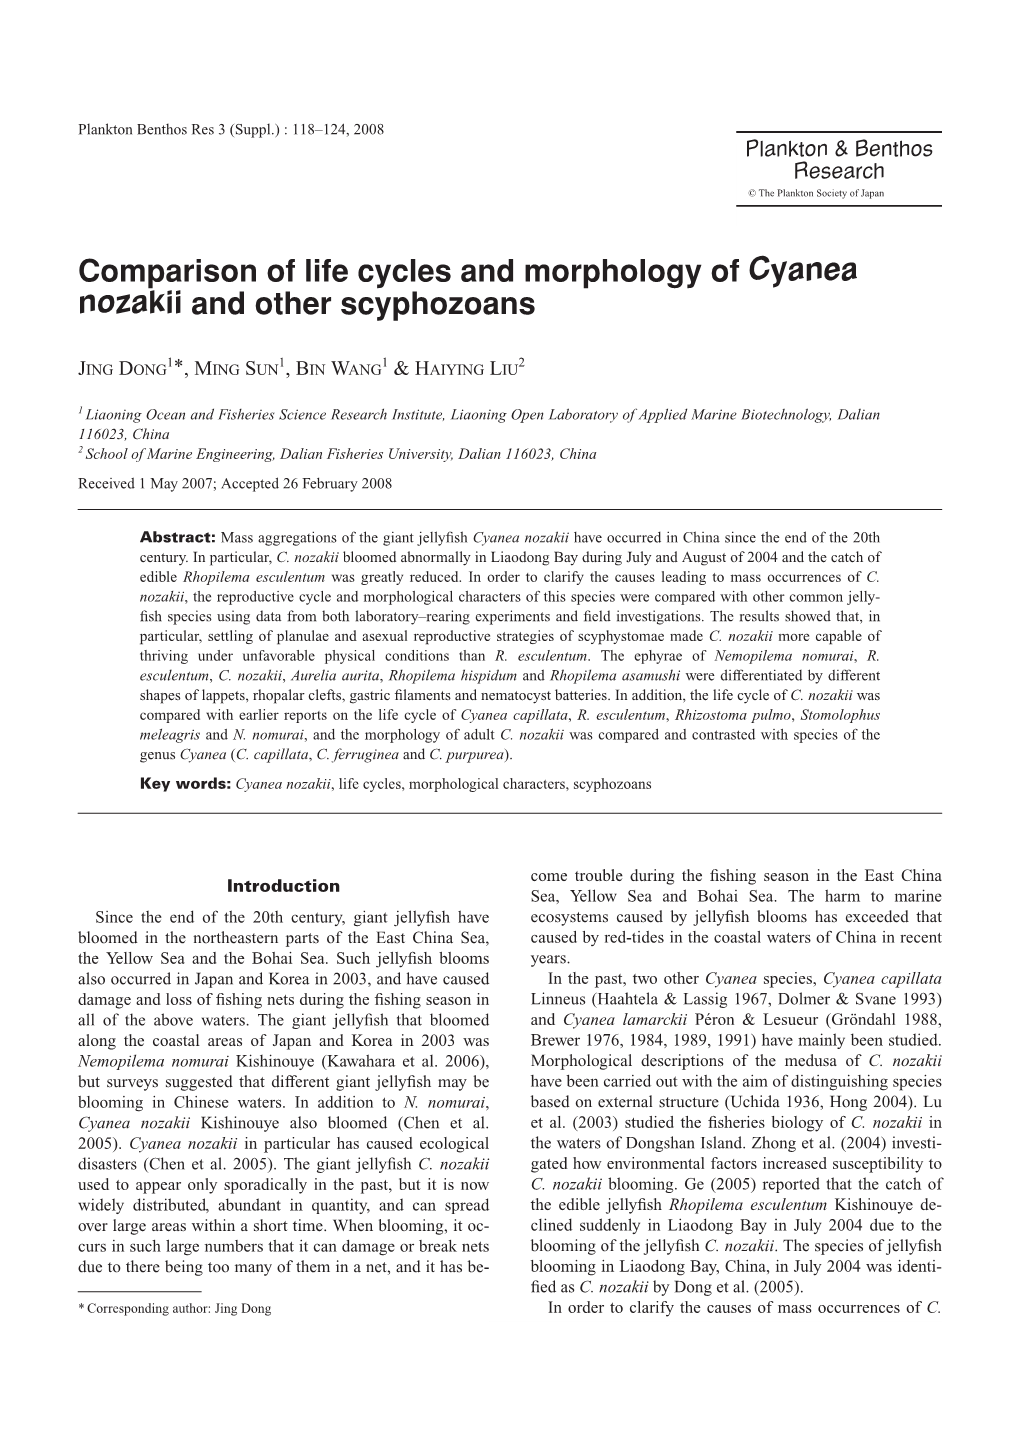 Comparison of Life Cycles and Morphology of Cyanea Nozakii and Other Scyphozoans